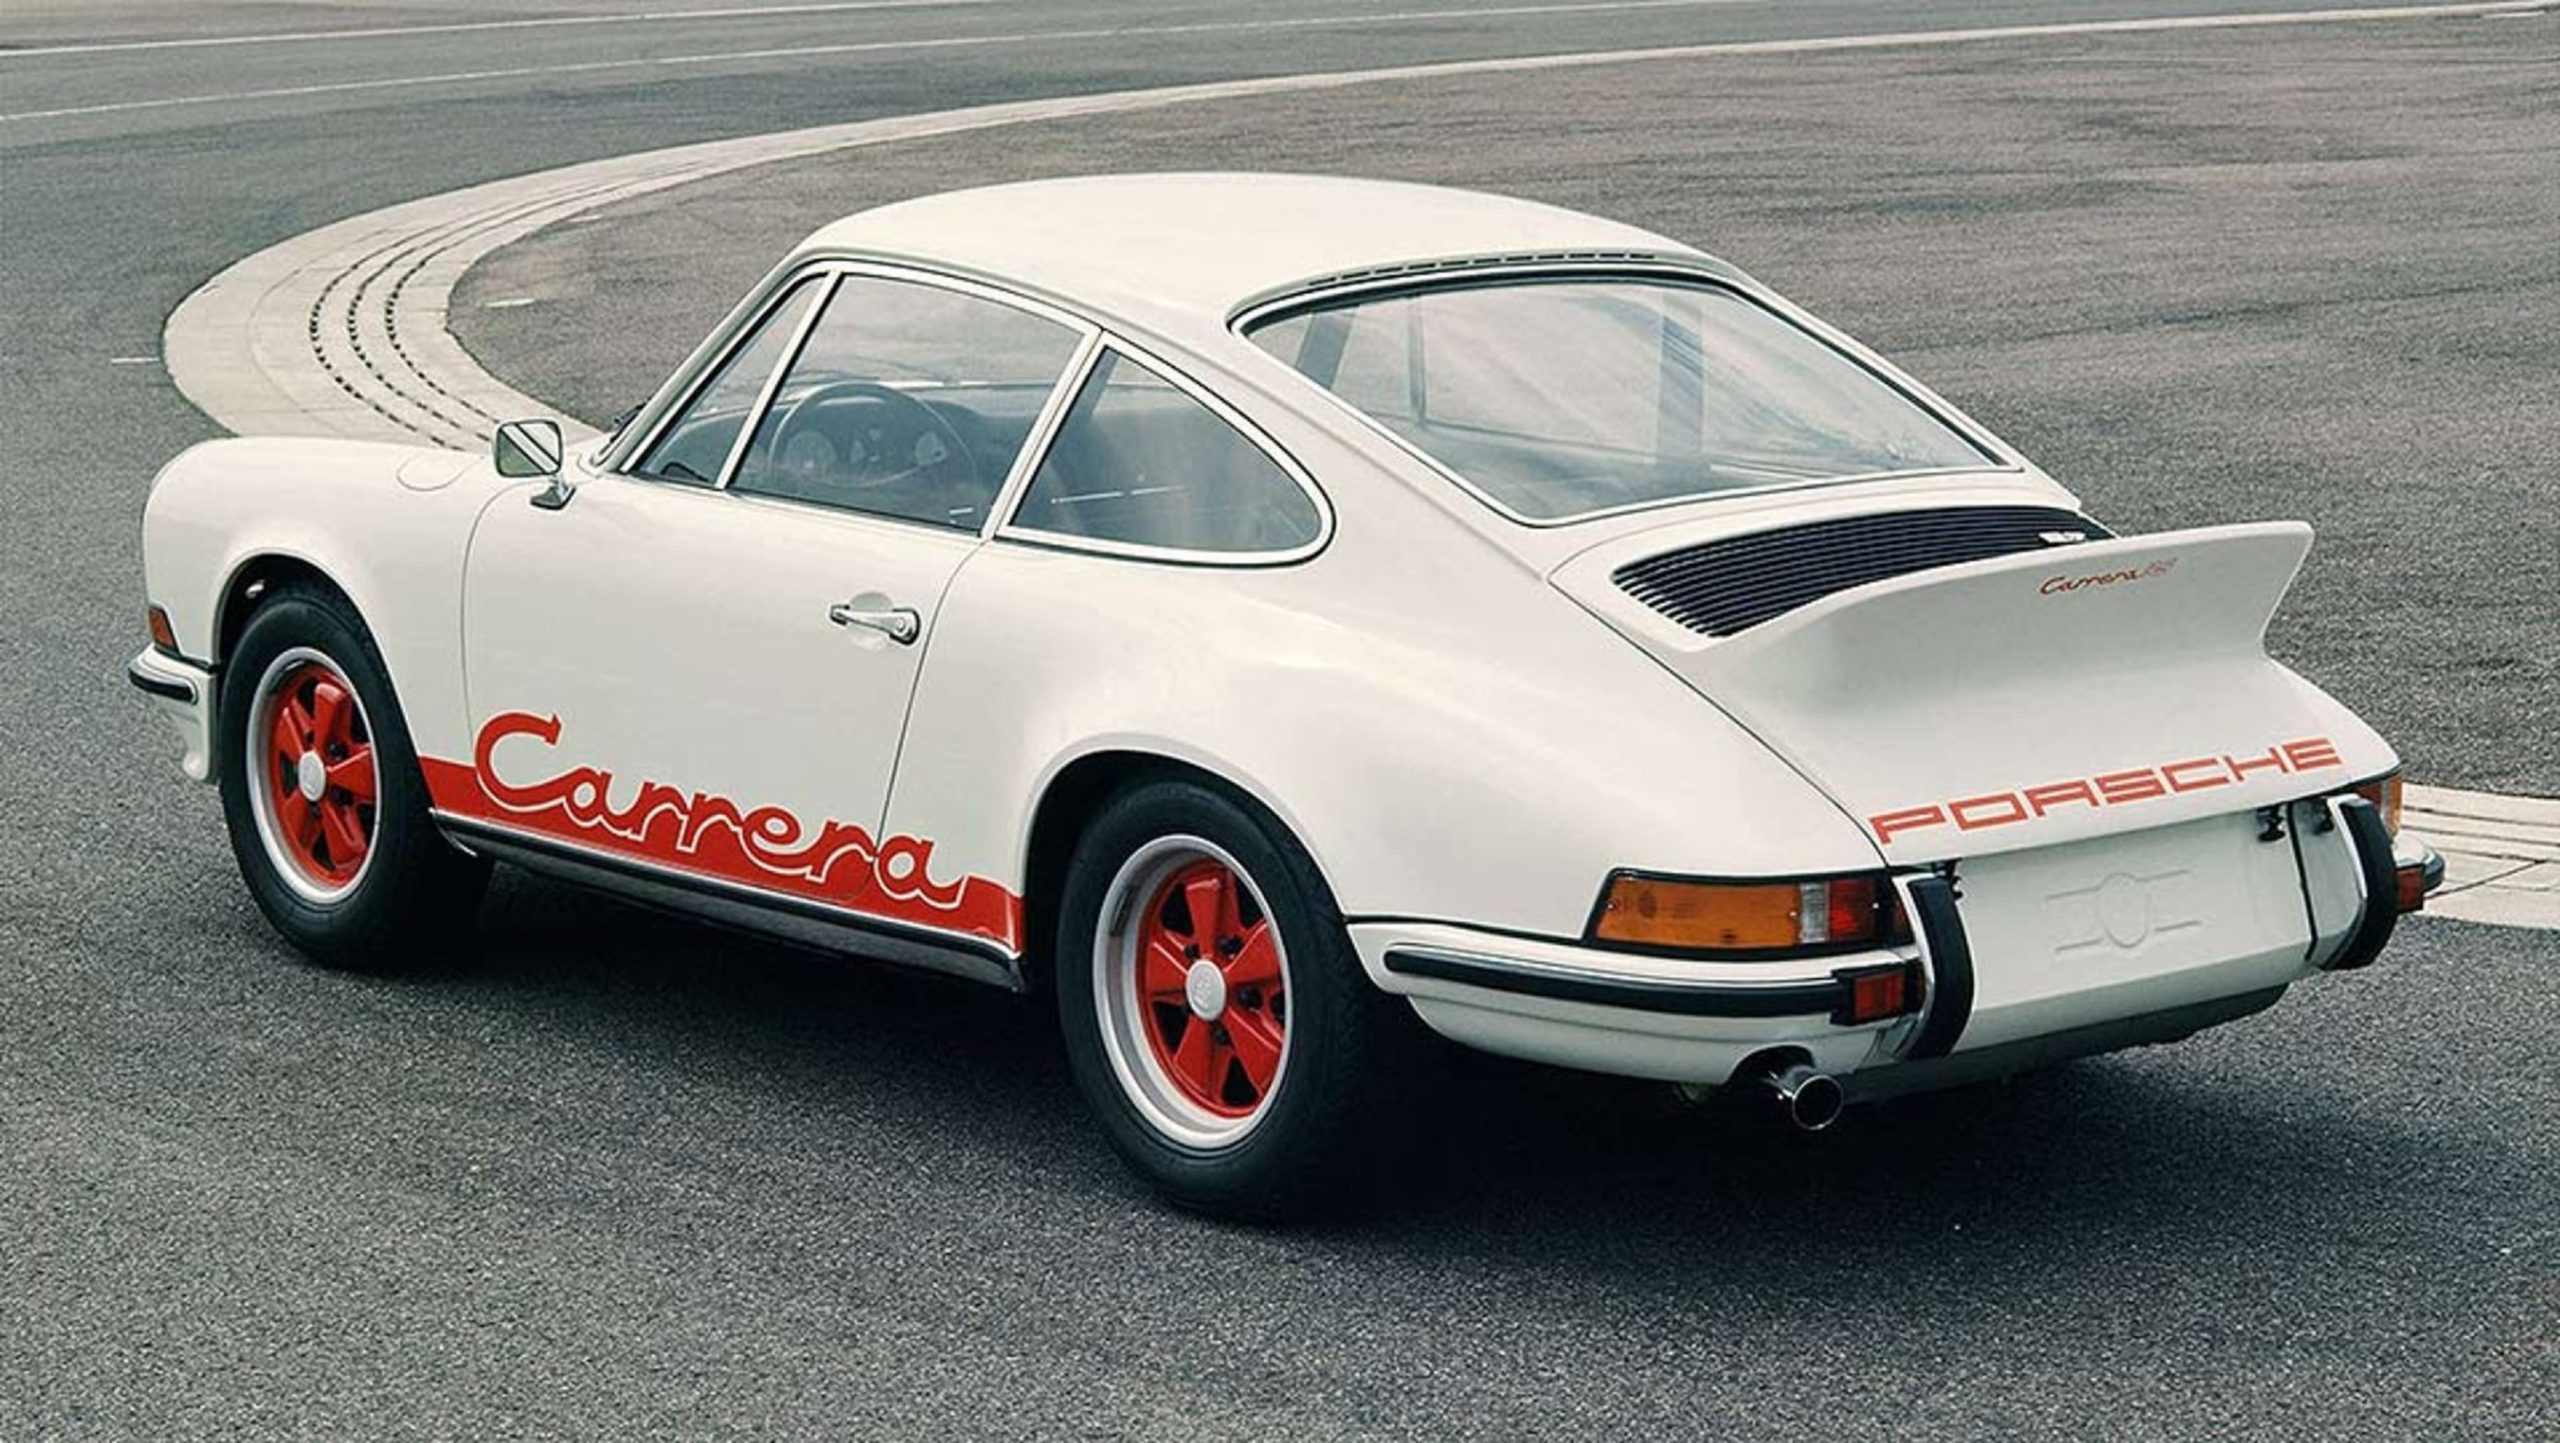 Why is the 911 called Carrera?